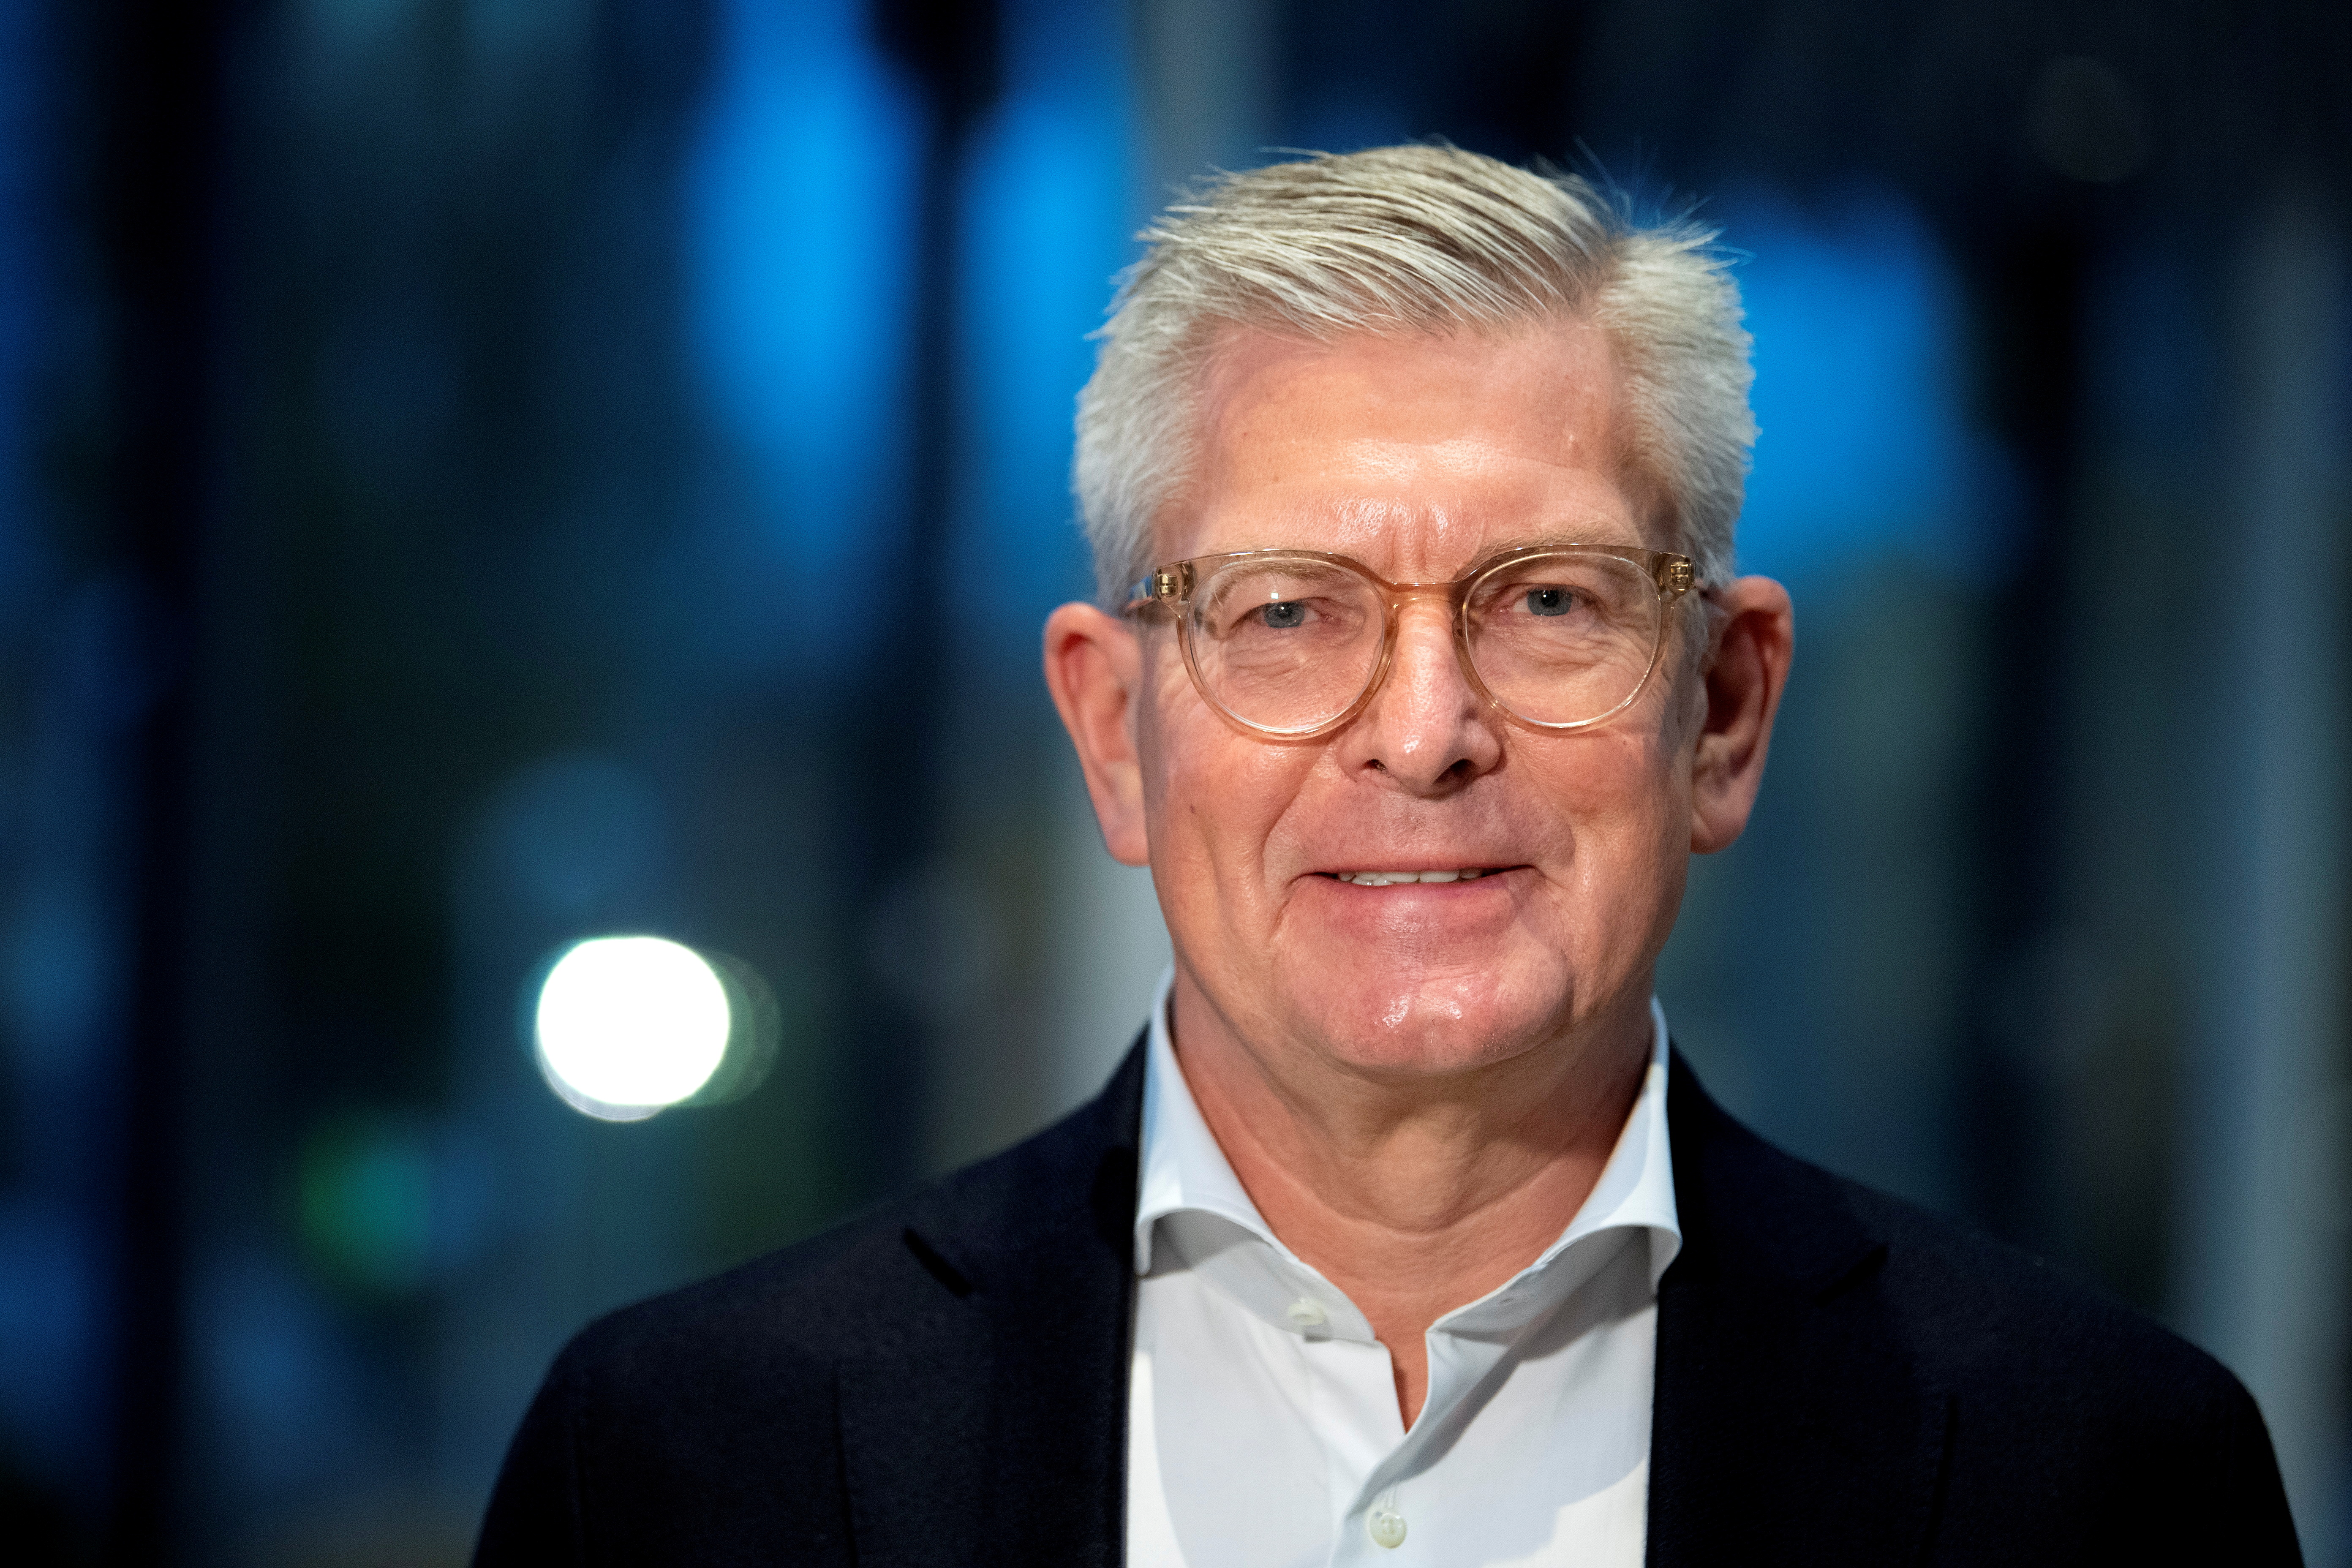 Ericsson's Chief Executive Officer Borje Ekholm poses for a picture during an interview at their headquarters in Kista, Stockholm, Sweden October 19, 2021. Jessica Gow/TT News Agency/via REUTERS       